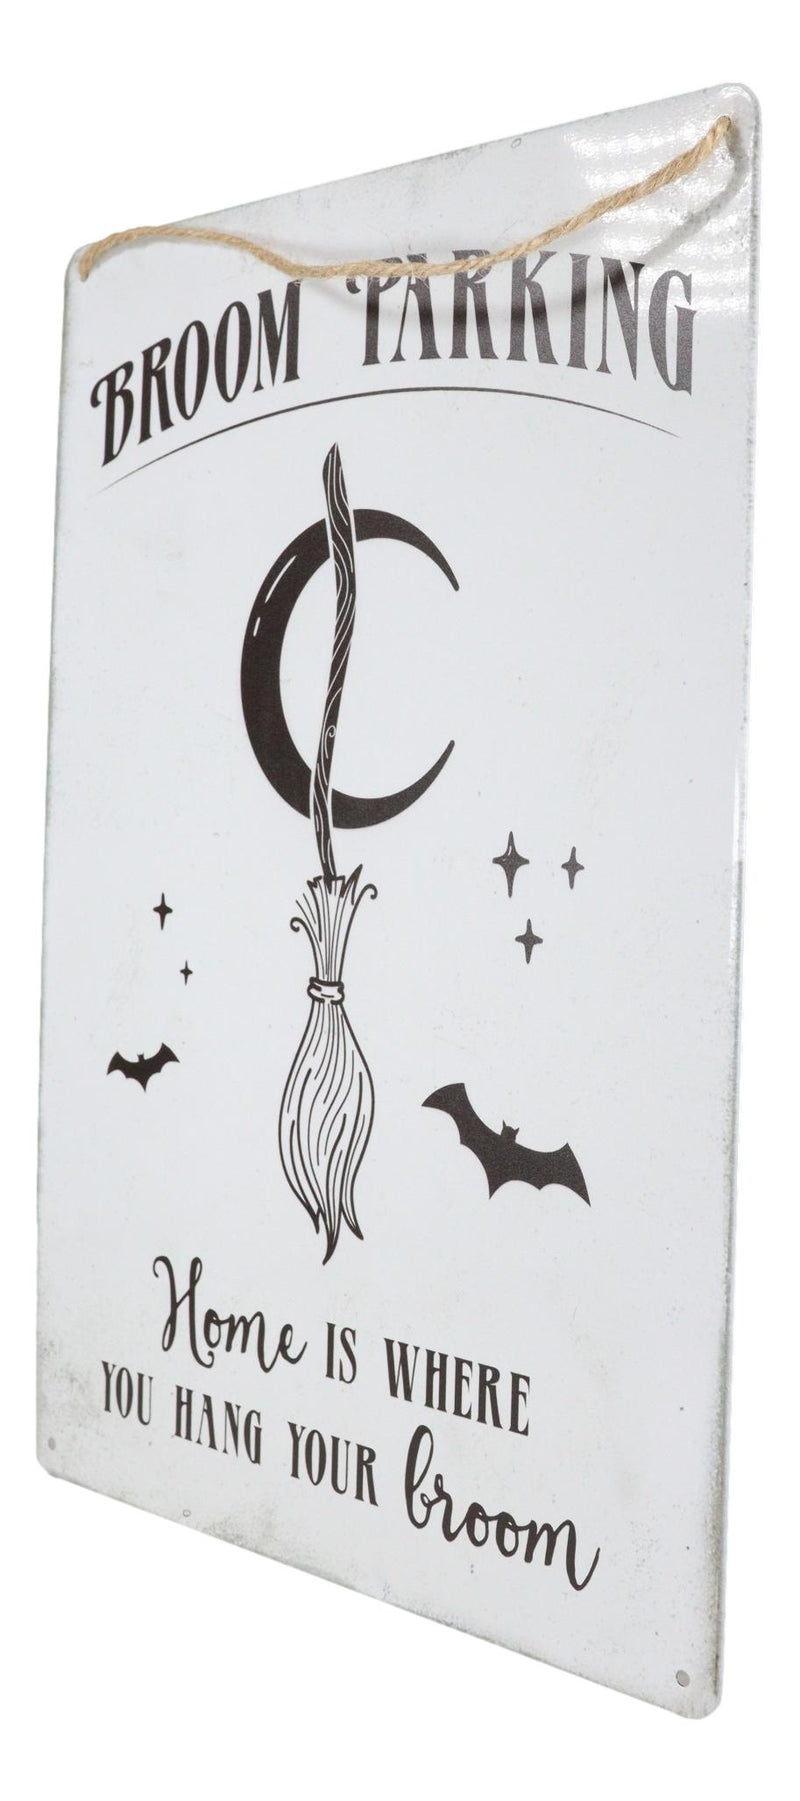 Witch Broom Parking Home is Where You Hang Your Broom Metal Wall Sign Decor